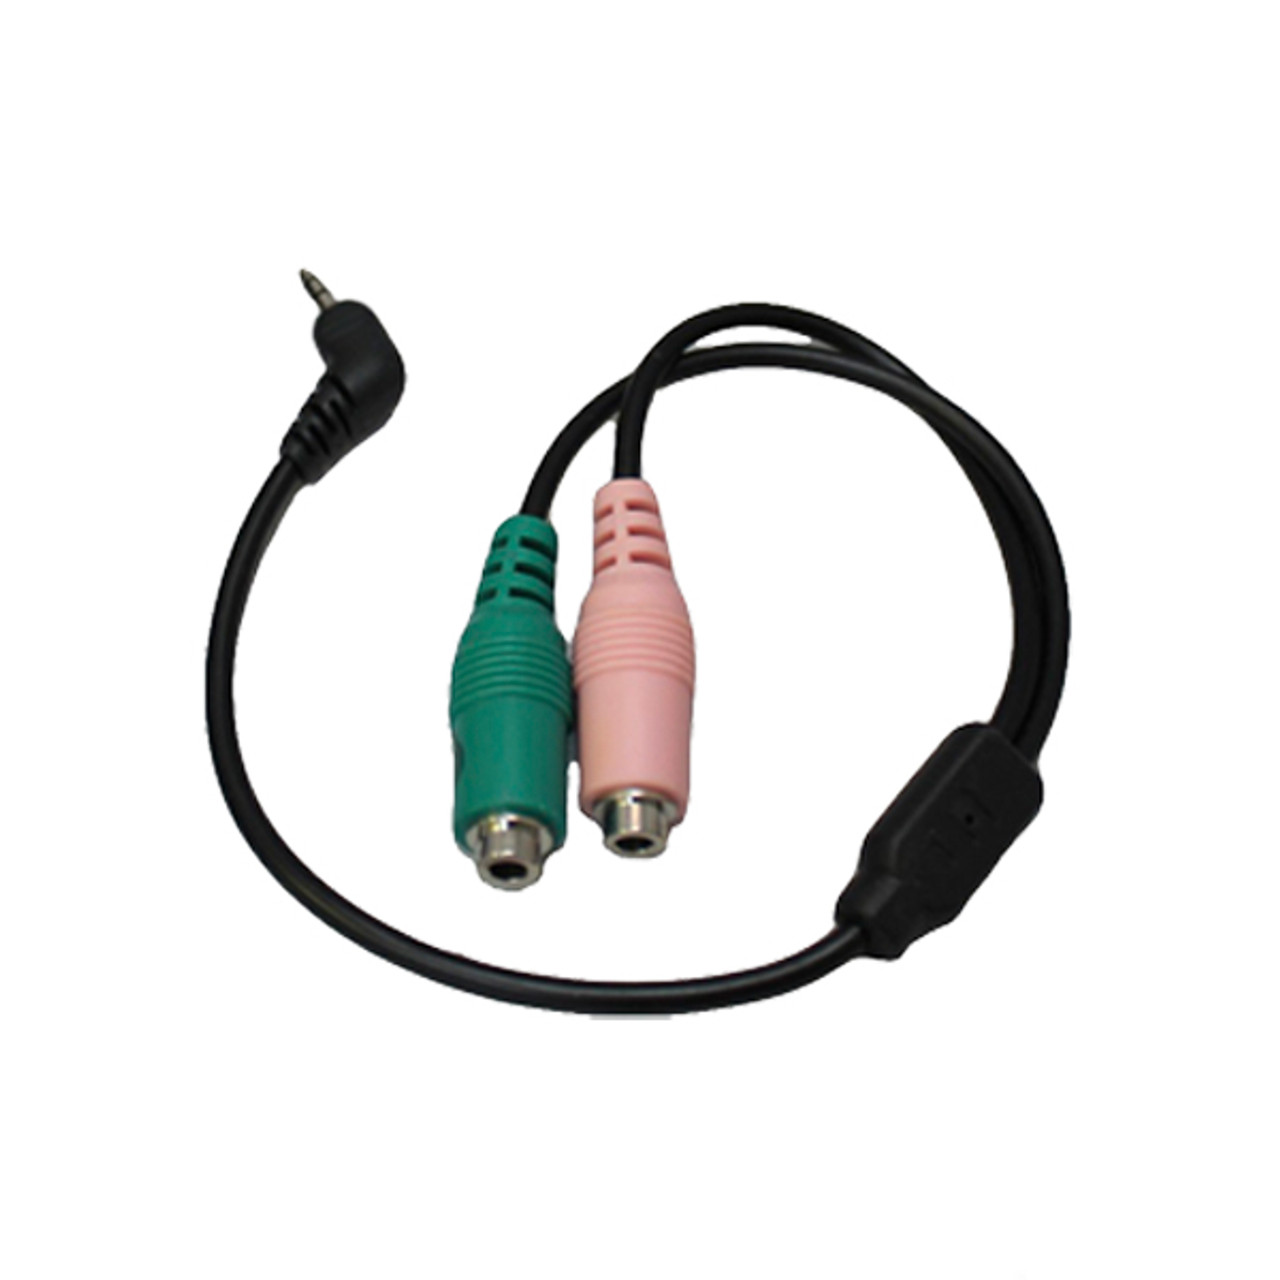 Bemiddelaar Conclusie Tablet PC Headset to Xbox 360 Controller | HeadsetBuddy